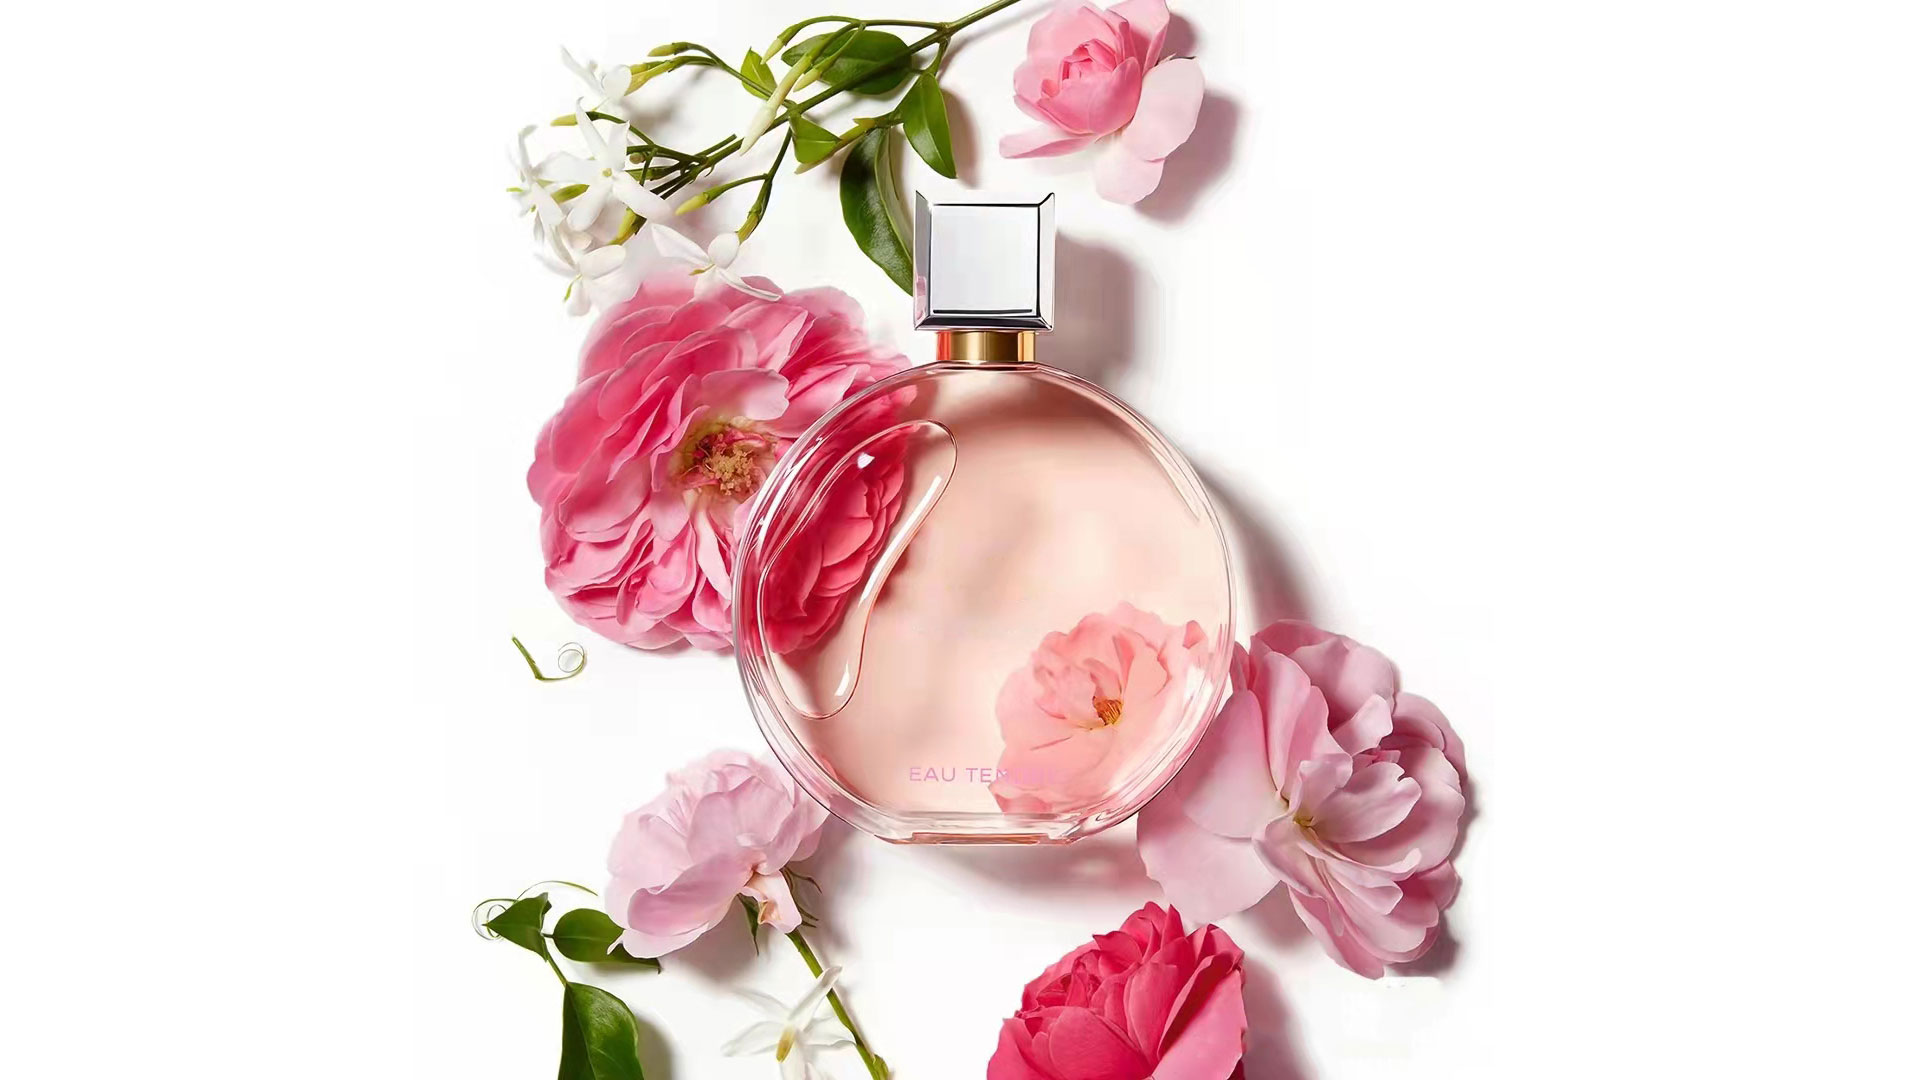 Perfume Industry Embraces Sustainable Development, Driving Environmental Innovation